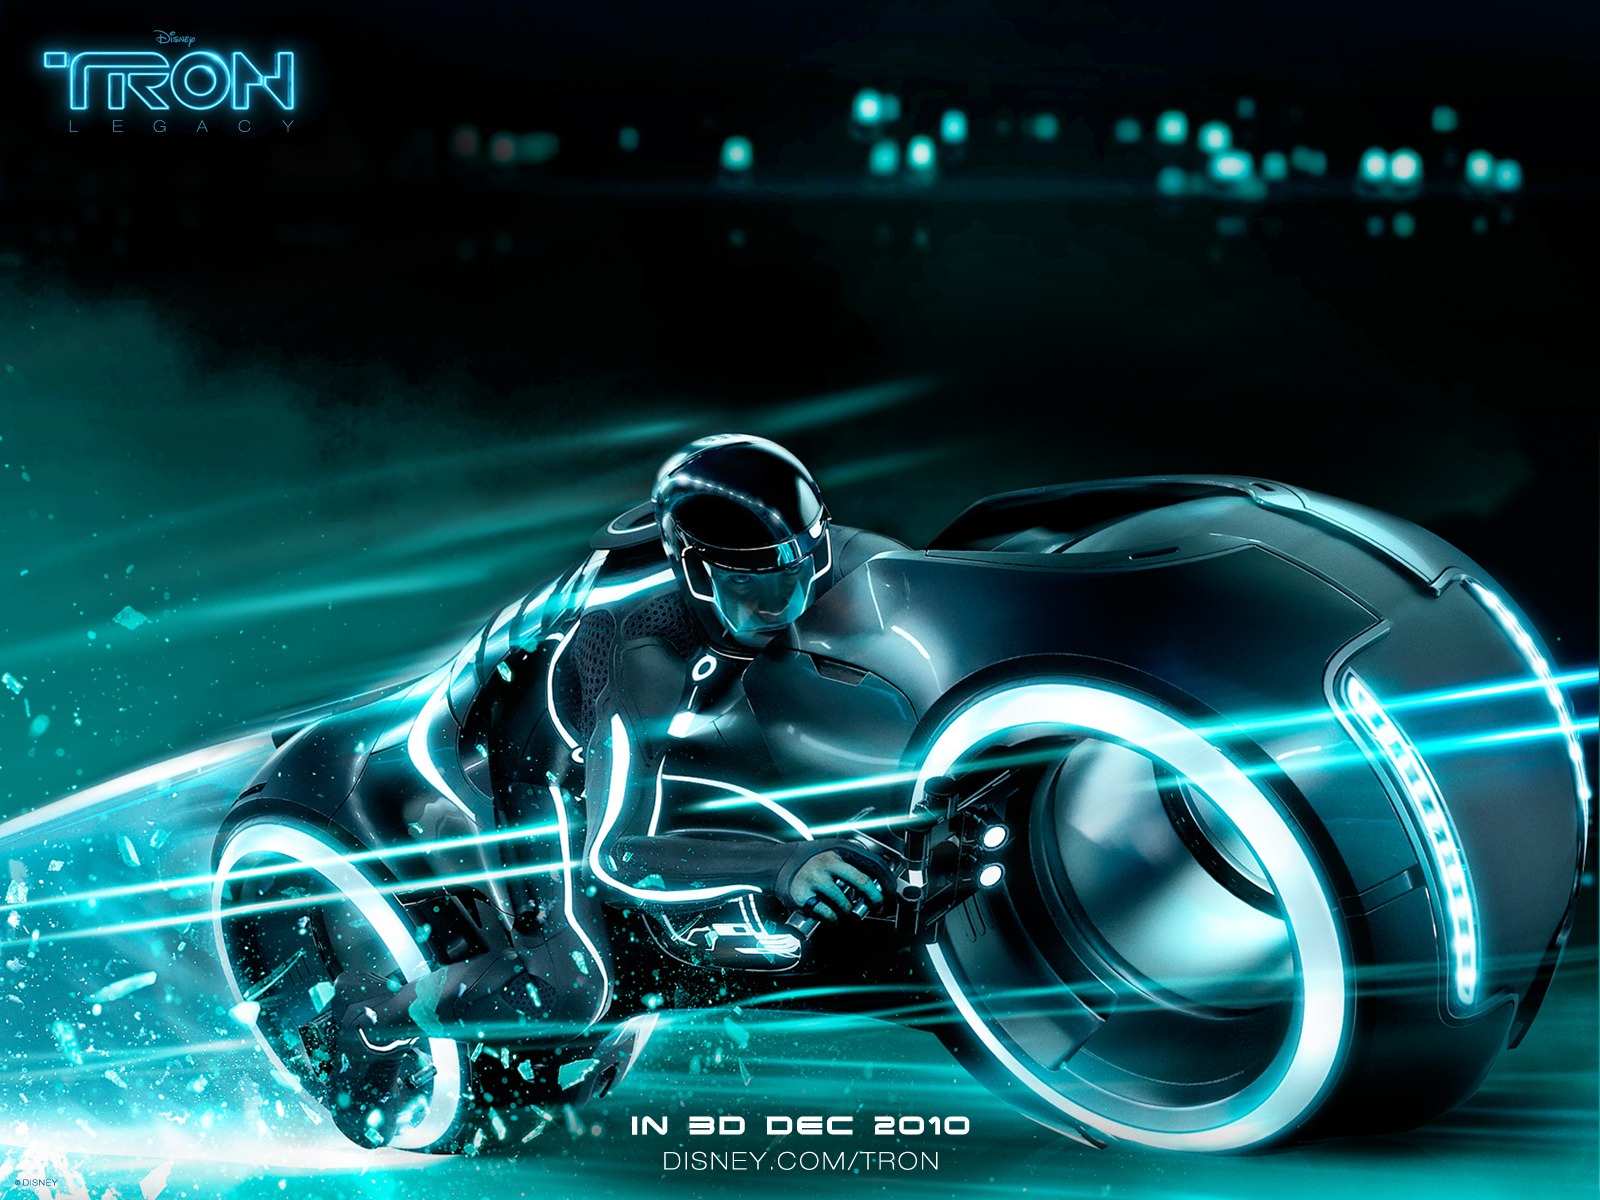 Download this Tron Legacy HD 1080p wallpapers and place them on your